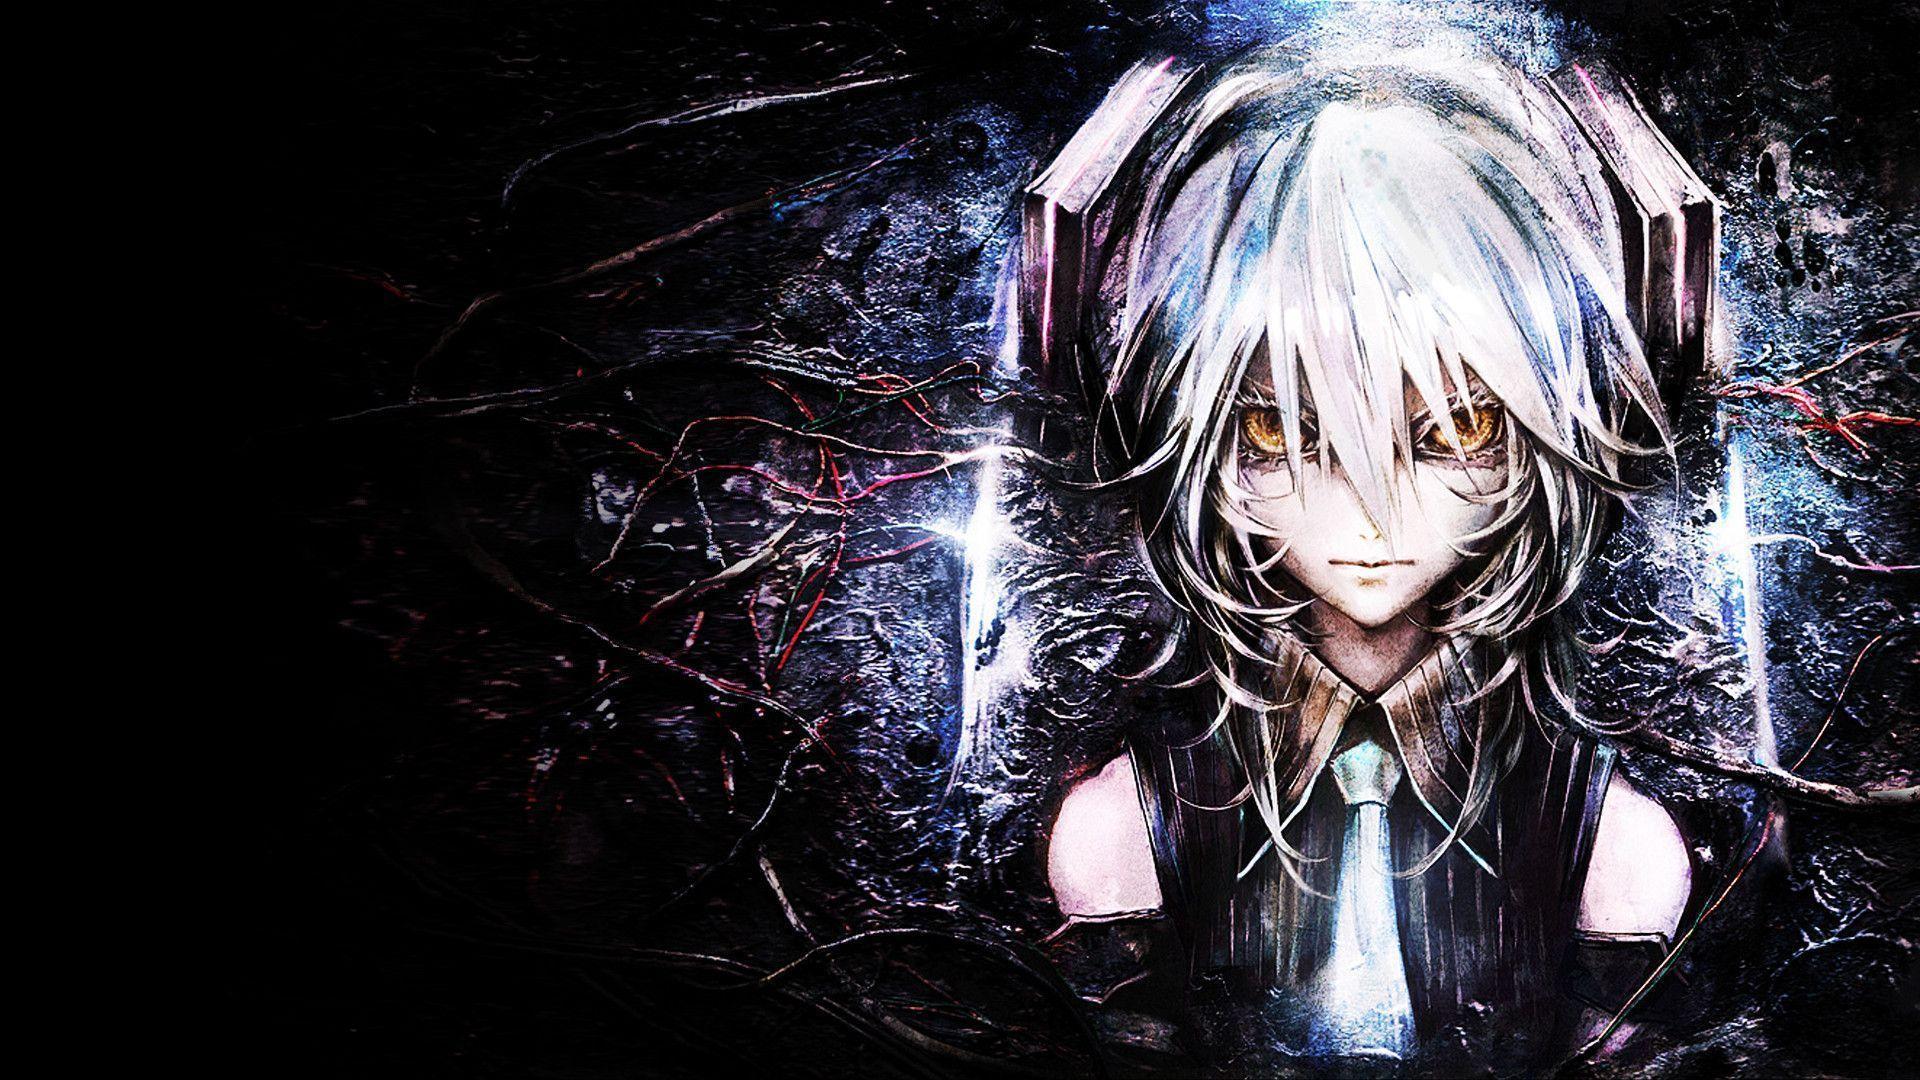 Anime Wallpapers HD 1920x1080 - Wallpaper Cave